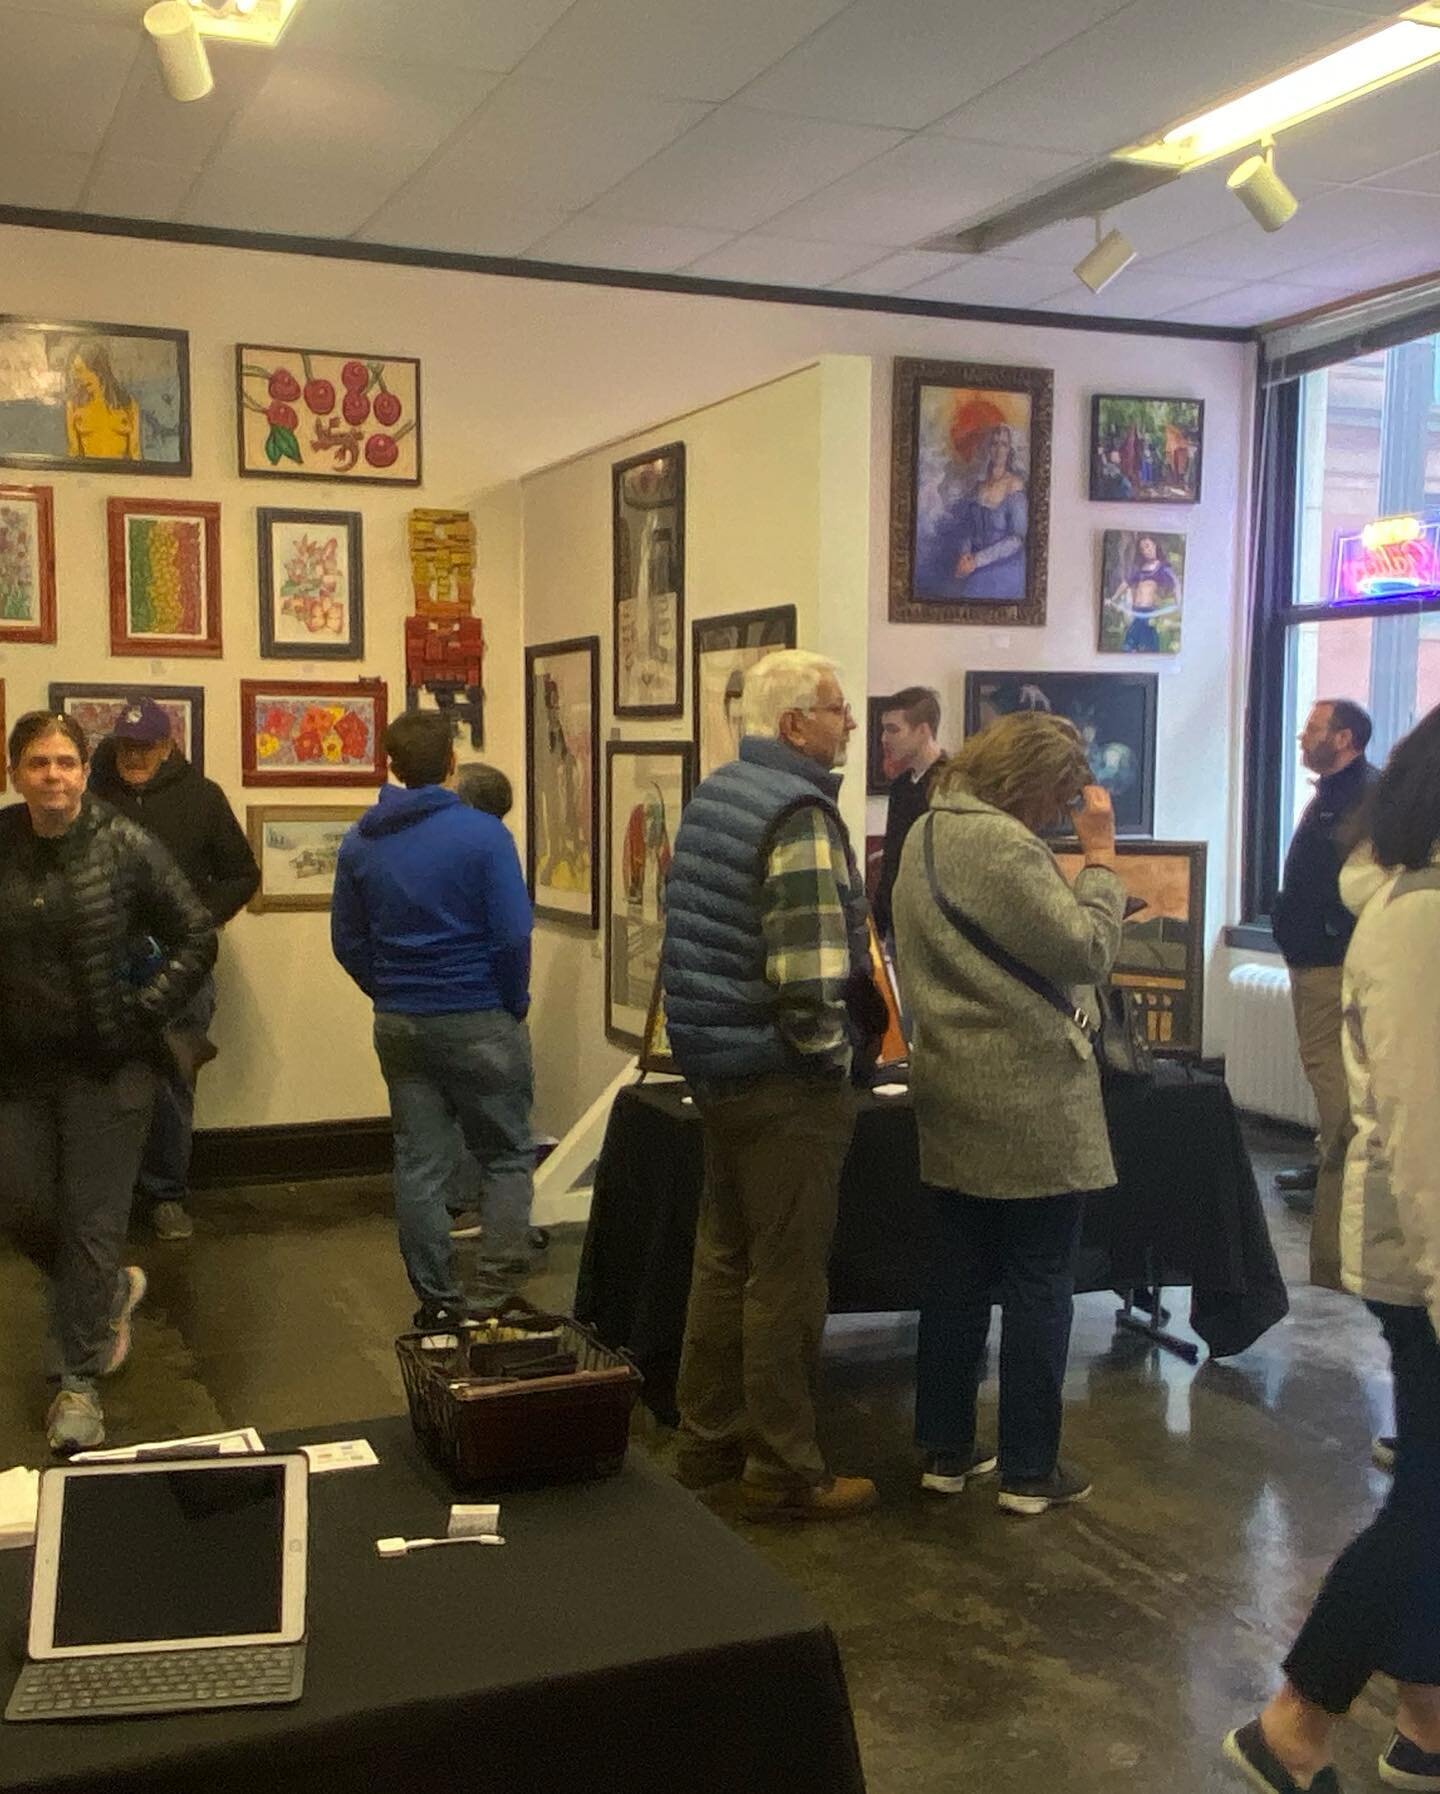 Great 3rd day of art crawl! Thank you for visiting and supporting local artists.